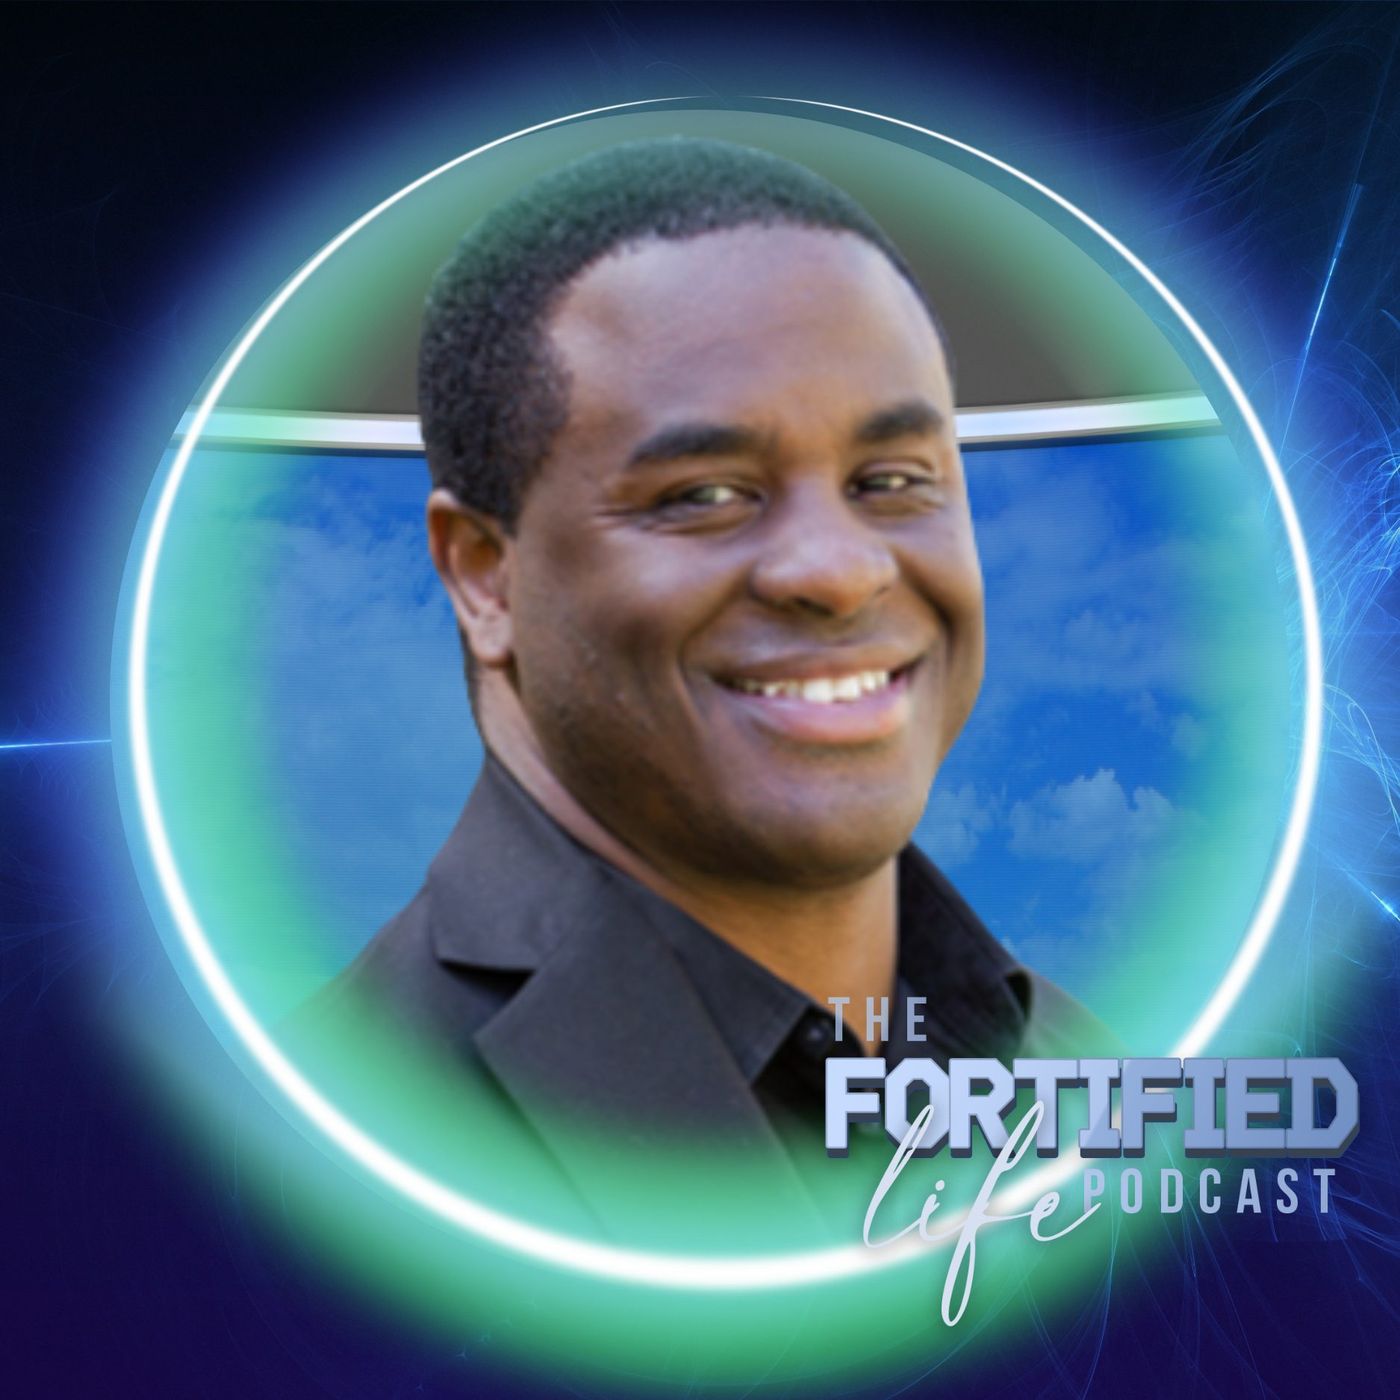 The Fortified Life Podcast with Jason Davis - EP 130 w/ Stan Belyshev | kingdom influencer, entrepreneur, author, and life coach